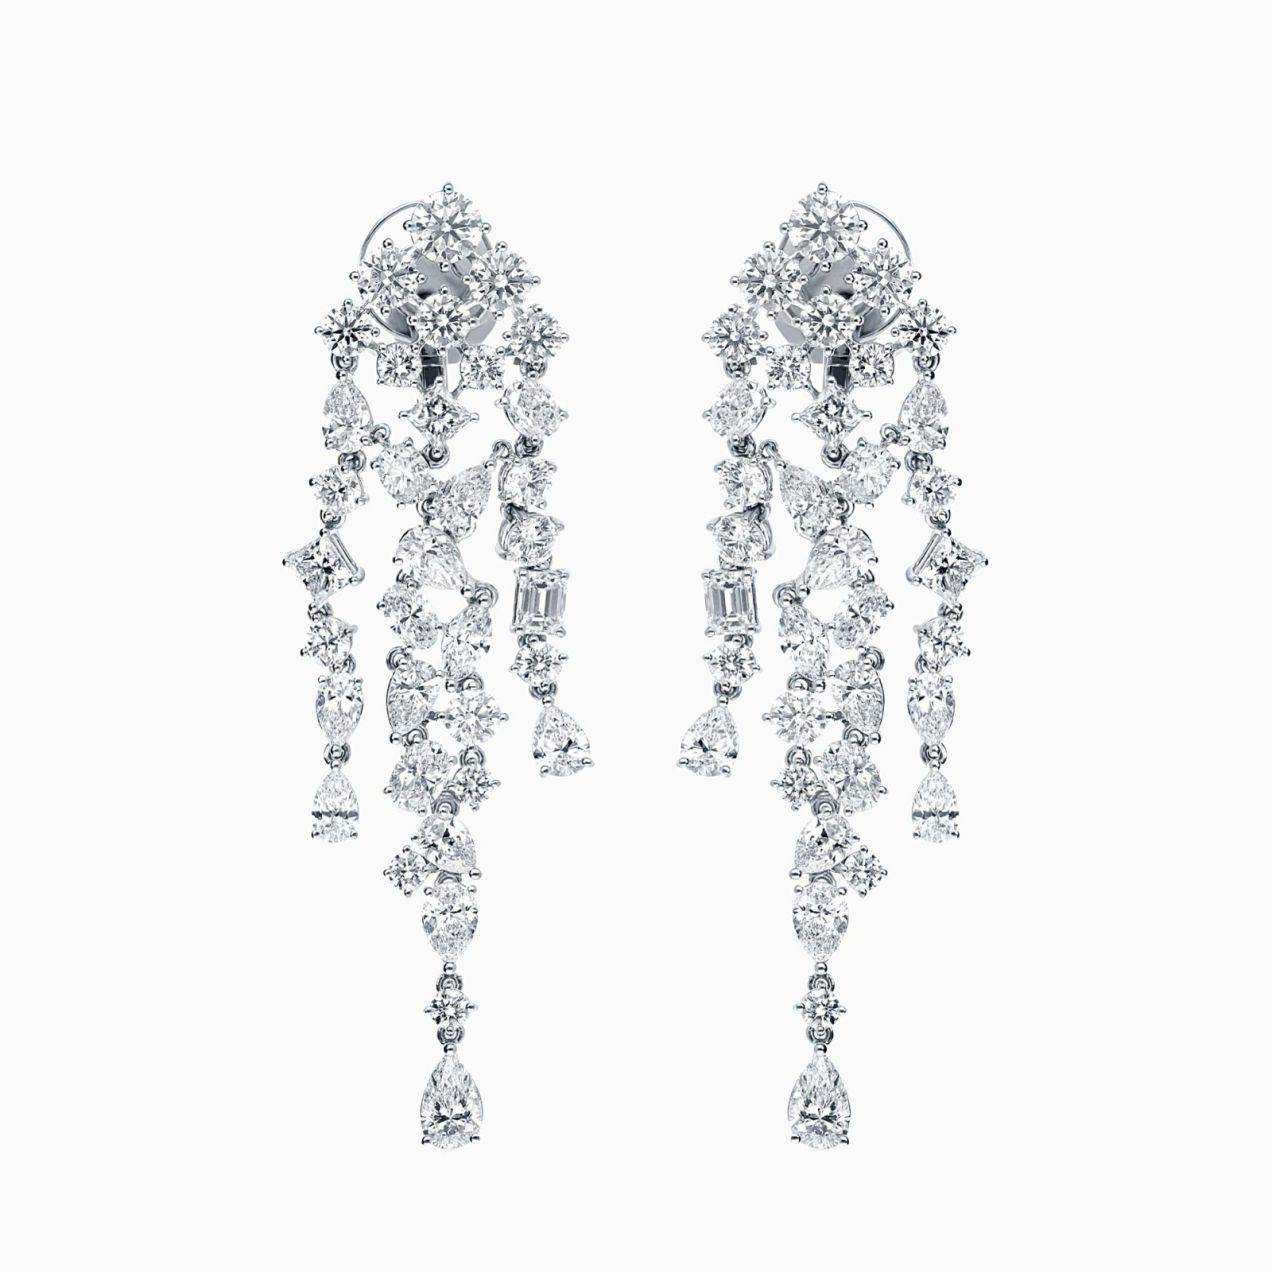 White gold earrings with multi-shaped diamonds